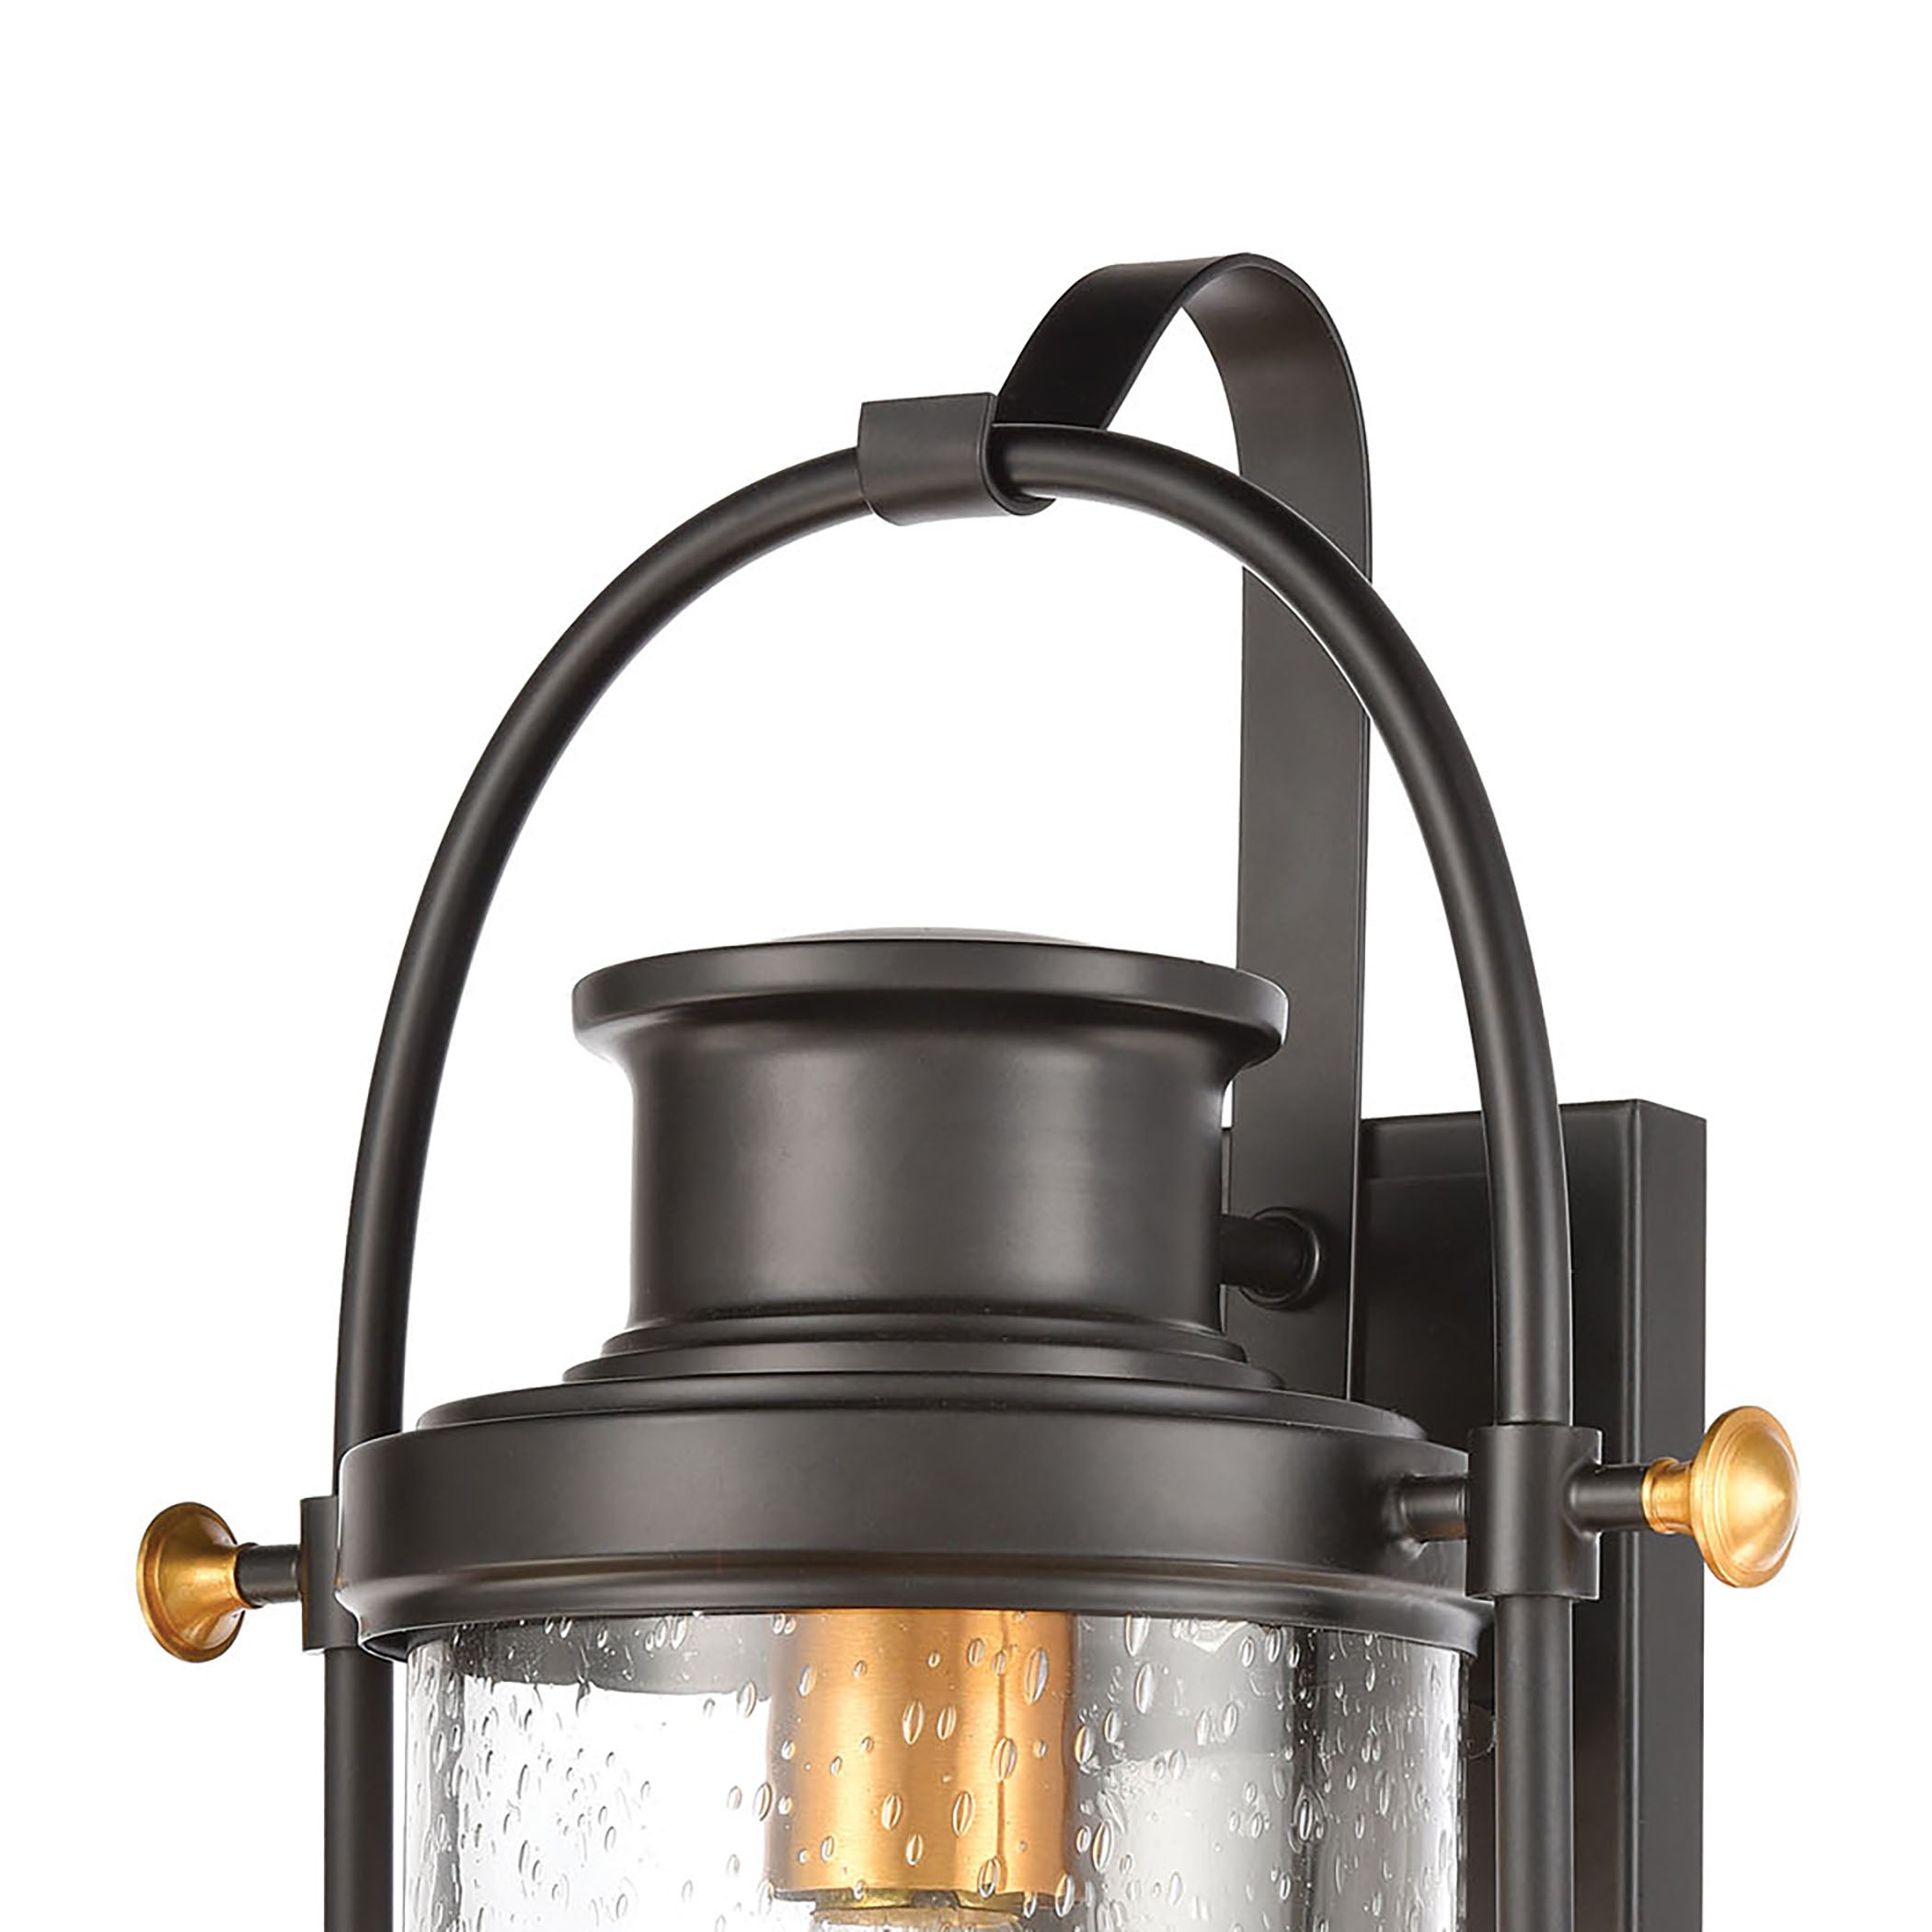 ELK Lighting 46670/1 Wexford 1-Light Sconce in Matte Black with Seedy Glass